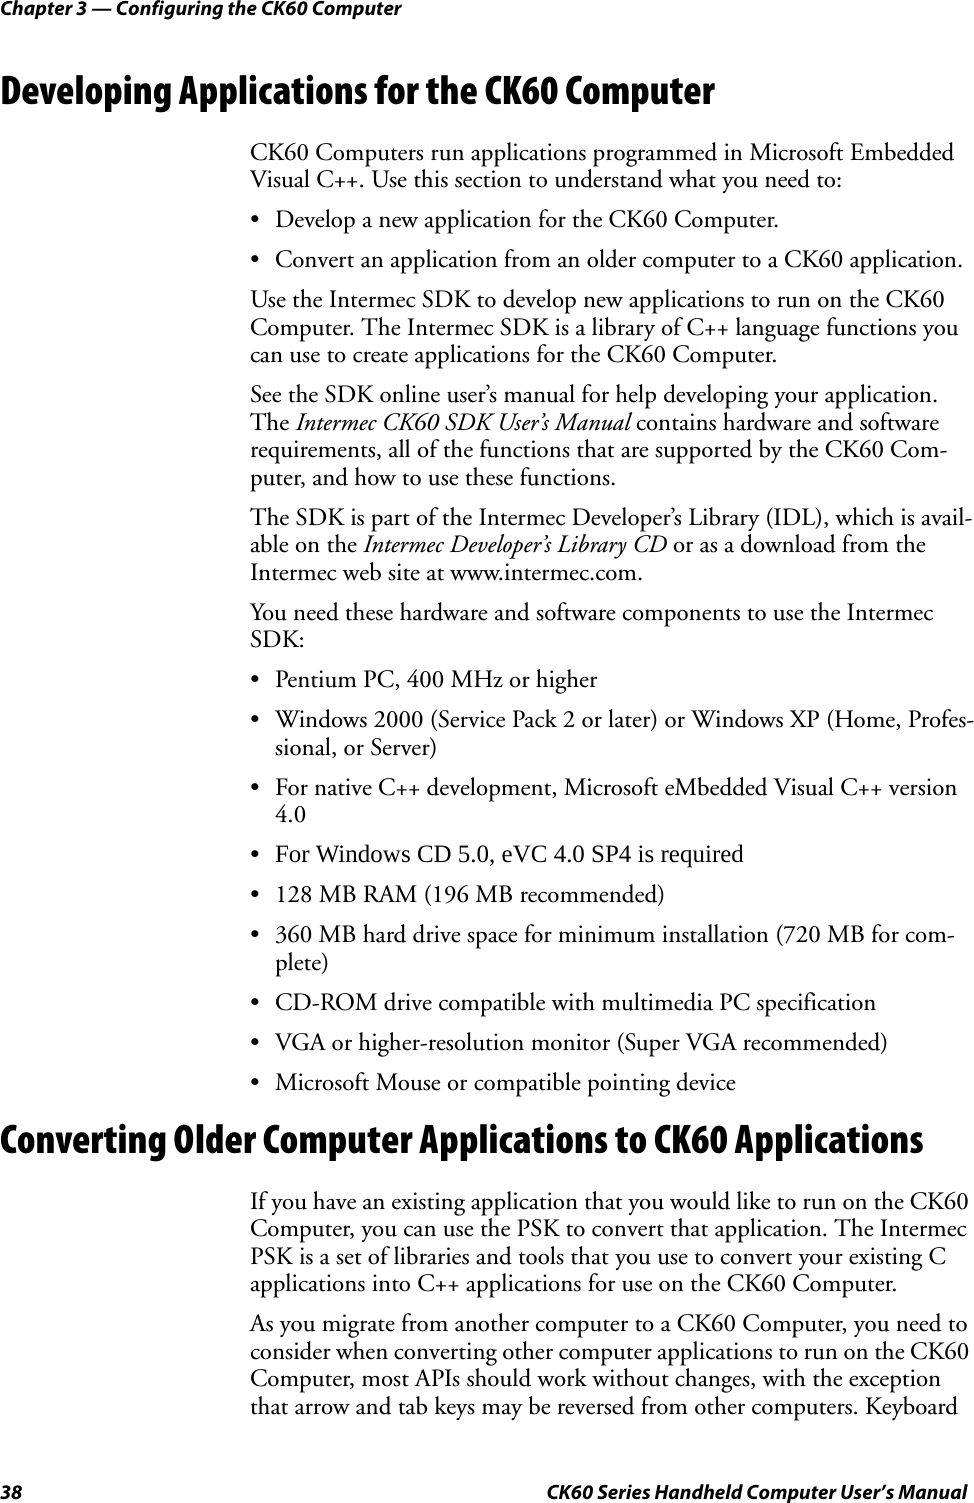 Chapter 3 — Configuring the CK60 Computer38 CK60 Series Handheld Computer User’s ManualDeveloping Applications for the CK60 ComputerCK60 Computers run applications programmed in Microsoft Embedded Visual C++. Use this section to understand what you need to:• Develop a new application for the CK60 Computer.• Convert an application from an older computer to a CK60 application.Use the Intermec SDK to develop new applications to run on the CK60 Computer. The Intermec SDK is a library of C++ language functions you can use to create applications for the CK60 Computer.See the SDK online user’s manual for help developing your application. The Intermec CK60 SDK User’s Manual contains hardware and software requirements, all of the functions that are supported by the CK60 Com-puter, and how to use these functions.The SDK is part of the Intermec Developer’s Library (IDL), which is avail-able on the Intermec Developer’s Library CD or as a download from the Intermec web site at www.intermec.com.You need these hardware and software components to use the Intermec SDK:• Pentium PC, 400 MHz or higher• Windows 2000 (Service Pack 2 or later) or Windows XP (Home, Profes-sional, or Server)• For native C++ development, Microsoft eMbedded Visual C++ version 4.0•For Windows CD 5.0, eVC 4.0 SP4 is required • 128 MB RAM (196 MB recommended)• 360 MB hard drive space for minimum installation (720 MB for com-plete)• CD-ROM drive compatible with multimedia PC specification• VGA or higher-resolution monitor (Super VGA recommended)• Microsoft Mouse or compatible pointing deviceConverting Older Computer Applications to CK60 ApplicationsIf you have an existing application that you would like to run on the CK60 Computer, you can use the PSK to convert that application. The Intermec PSK is a set of libraries and tools that you use to convert your existing C applications into C++ applications for use on the CK60 Computer.As you migrate from another computer to a CK60 Computer, you need to consider when converting other computer applications to run on the CK60 Computer, most APIs should work without changes, with the exception that arrow and tab keys may be reversed from other computers. Keyboard 